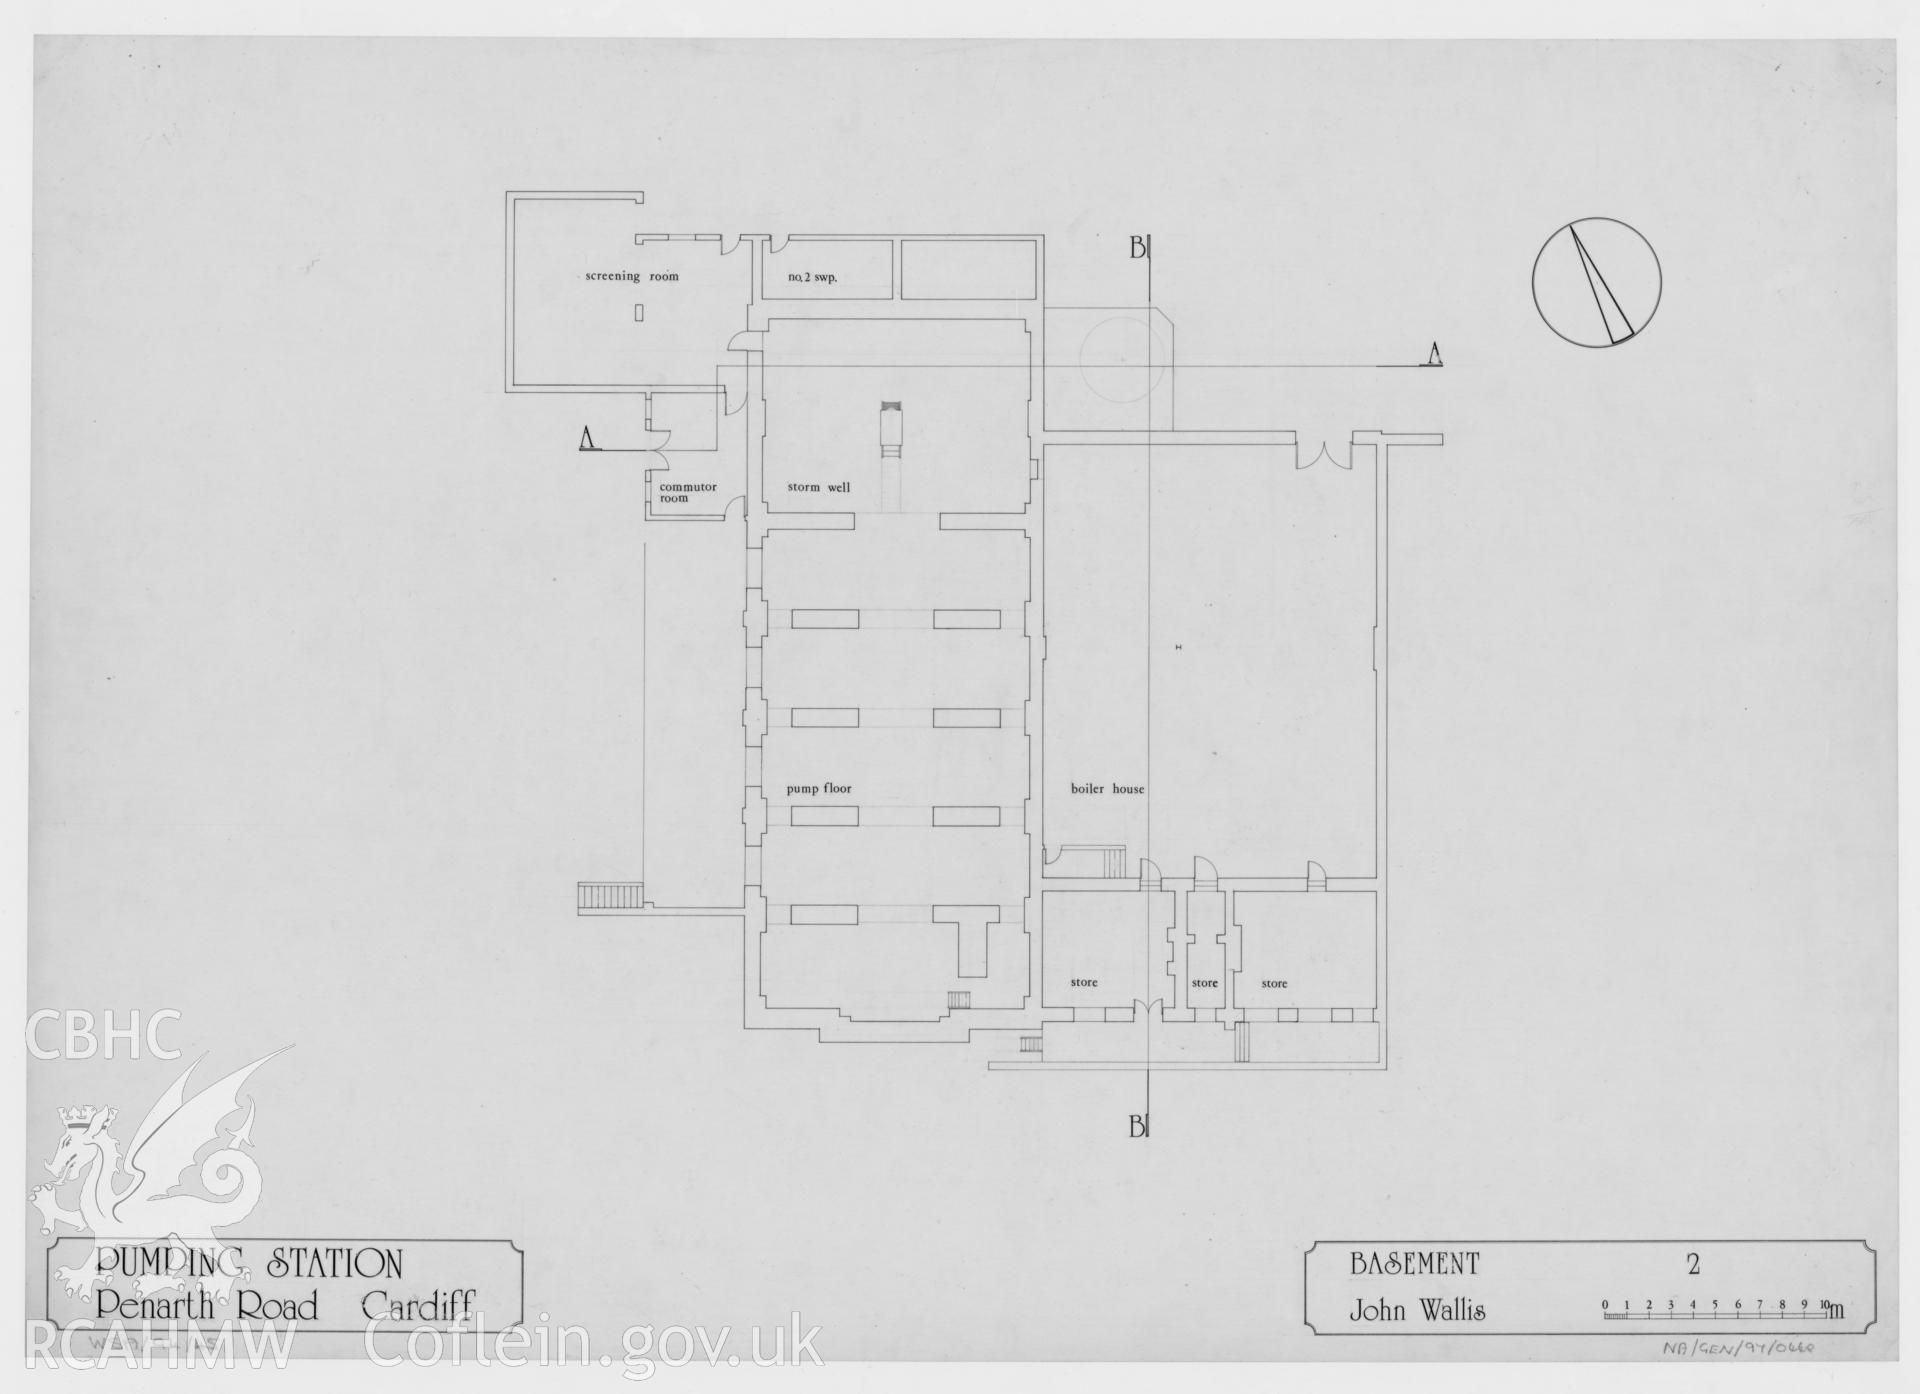 Measured drawing showing basement plan of Pumping Station, Penarth Road, Cardiff, produced by John Wallis, 1972-1973.